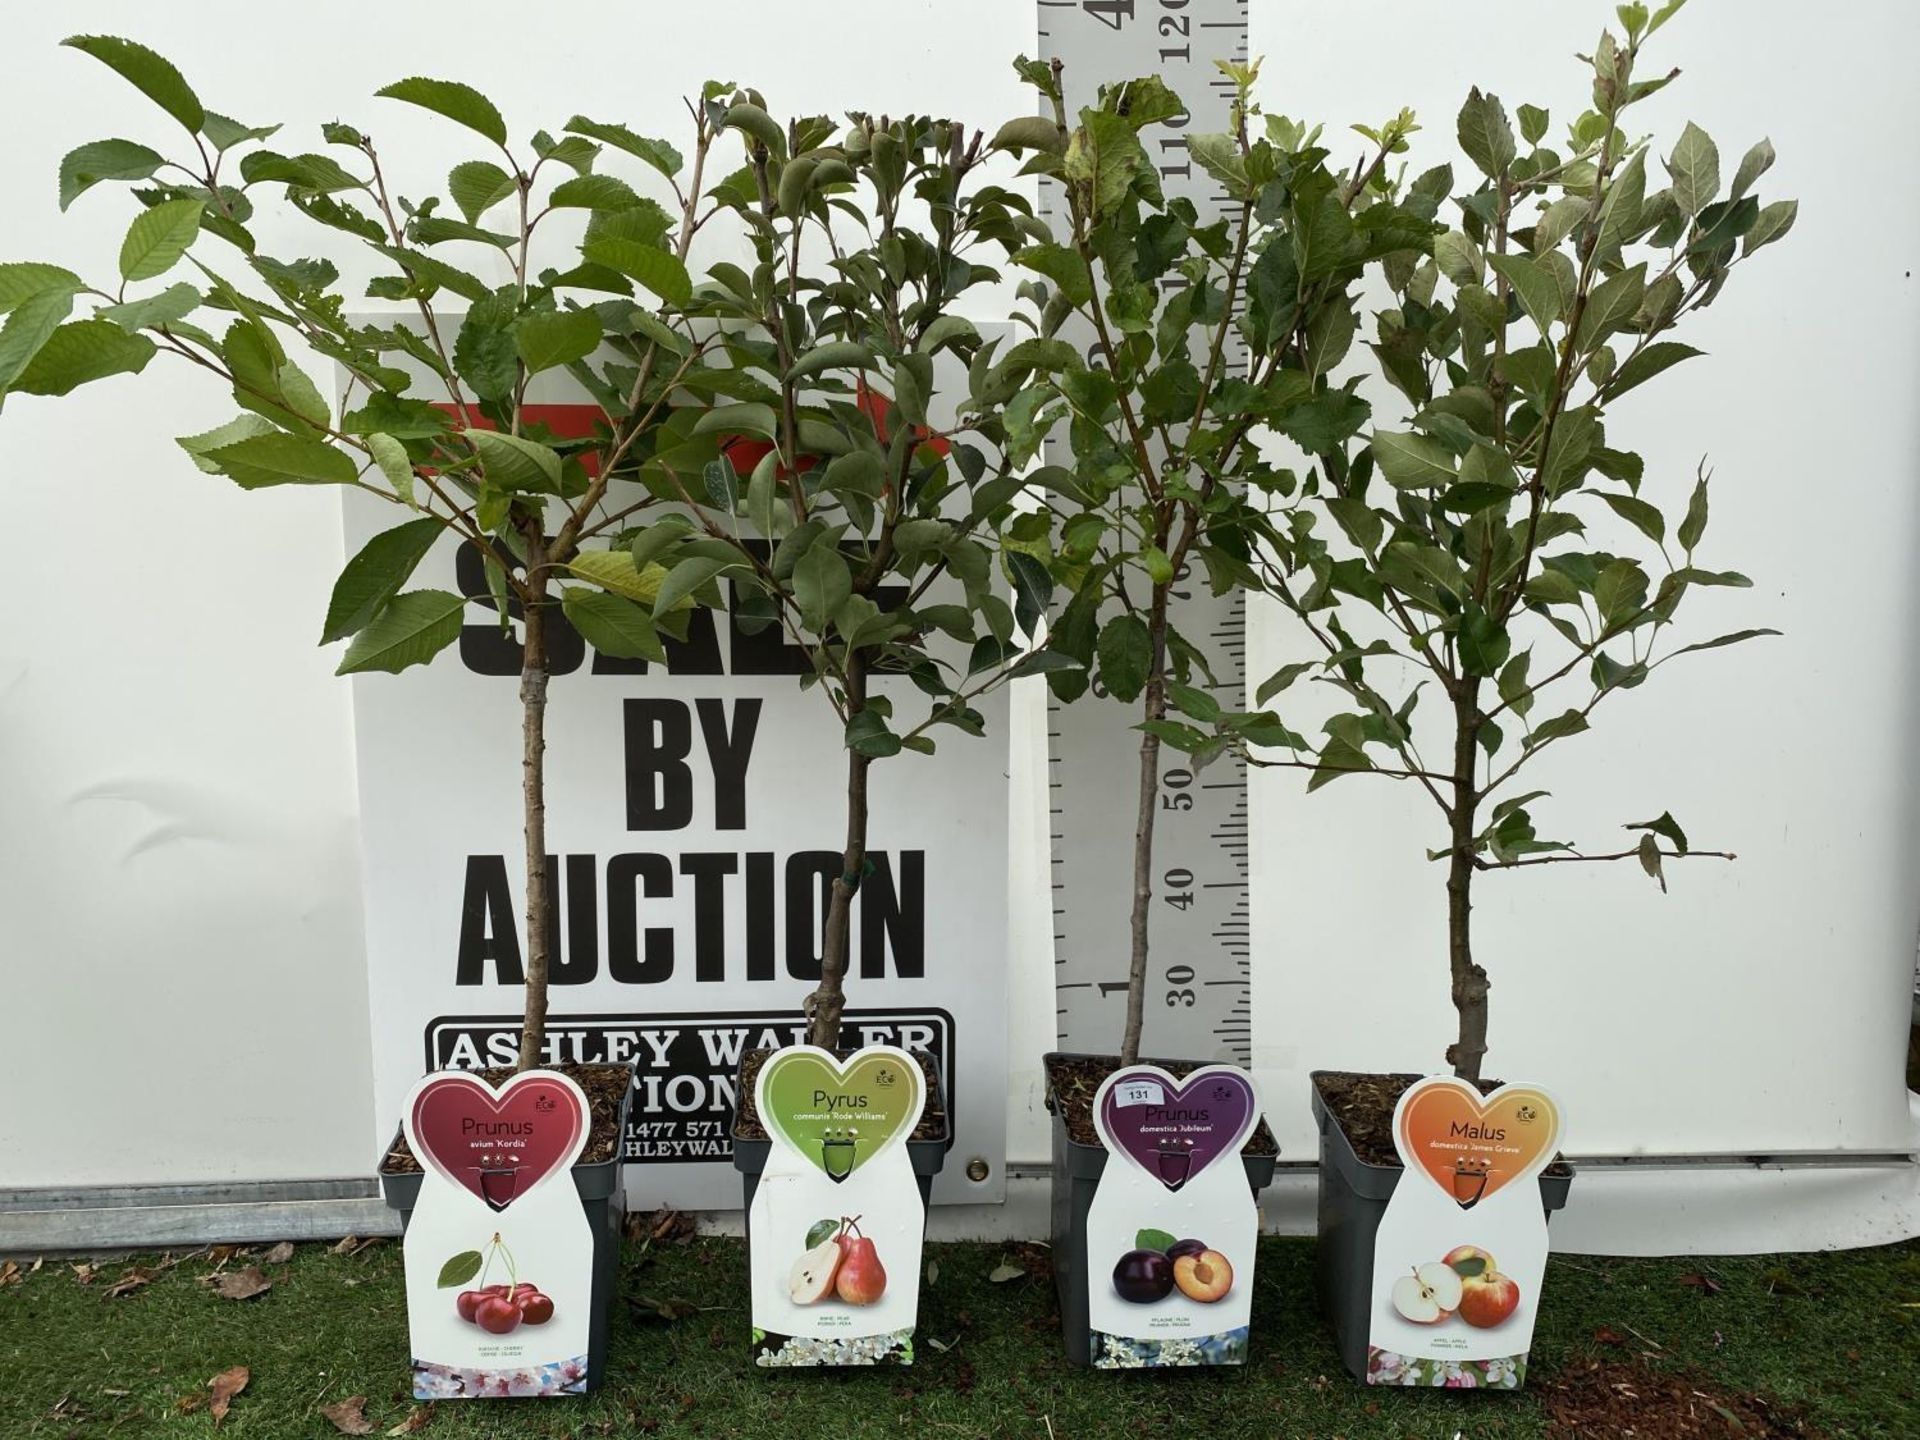 WELCOME TO ASHLEY WALLER HORTICULTURE AUCTION LOTS BEING ADDED DAILY - Image 19 of 21